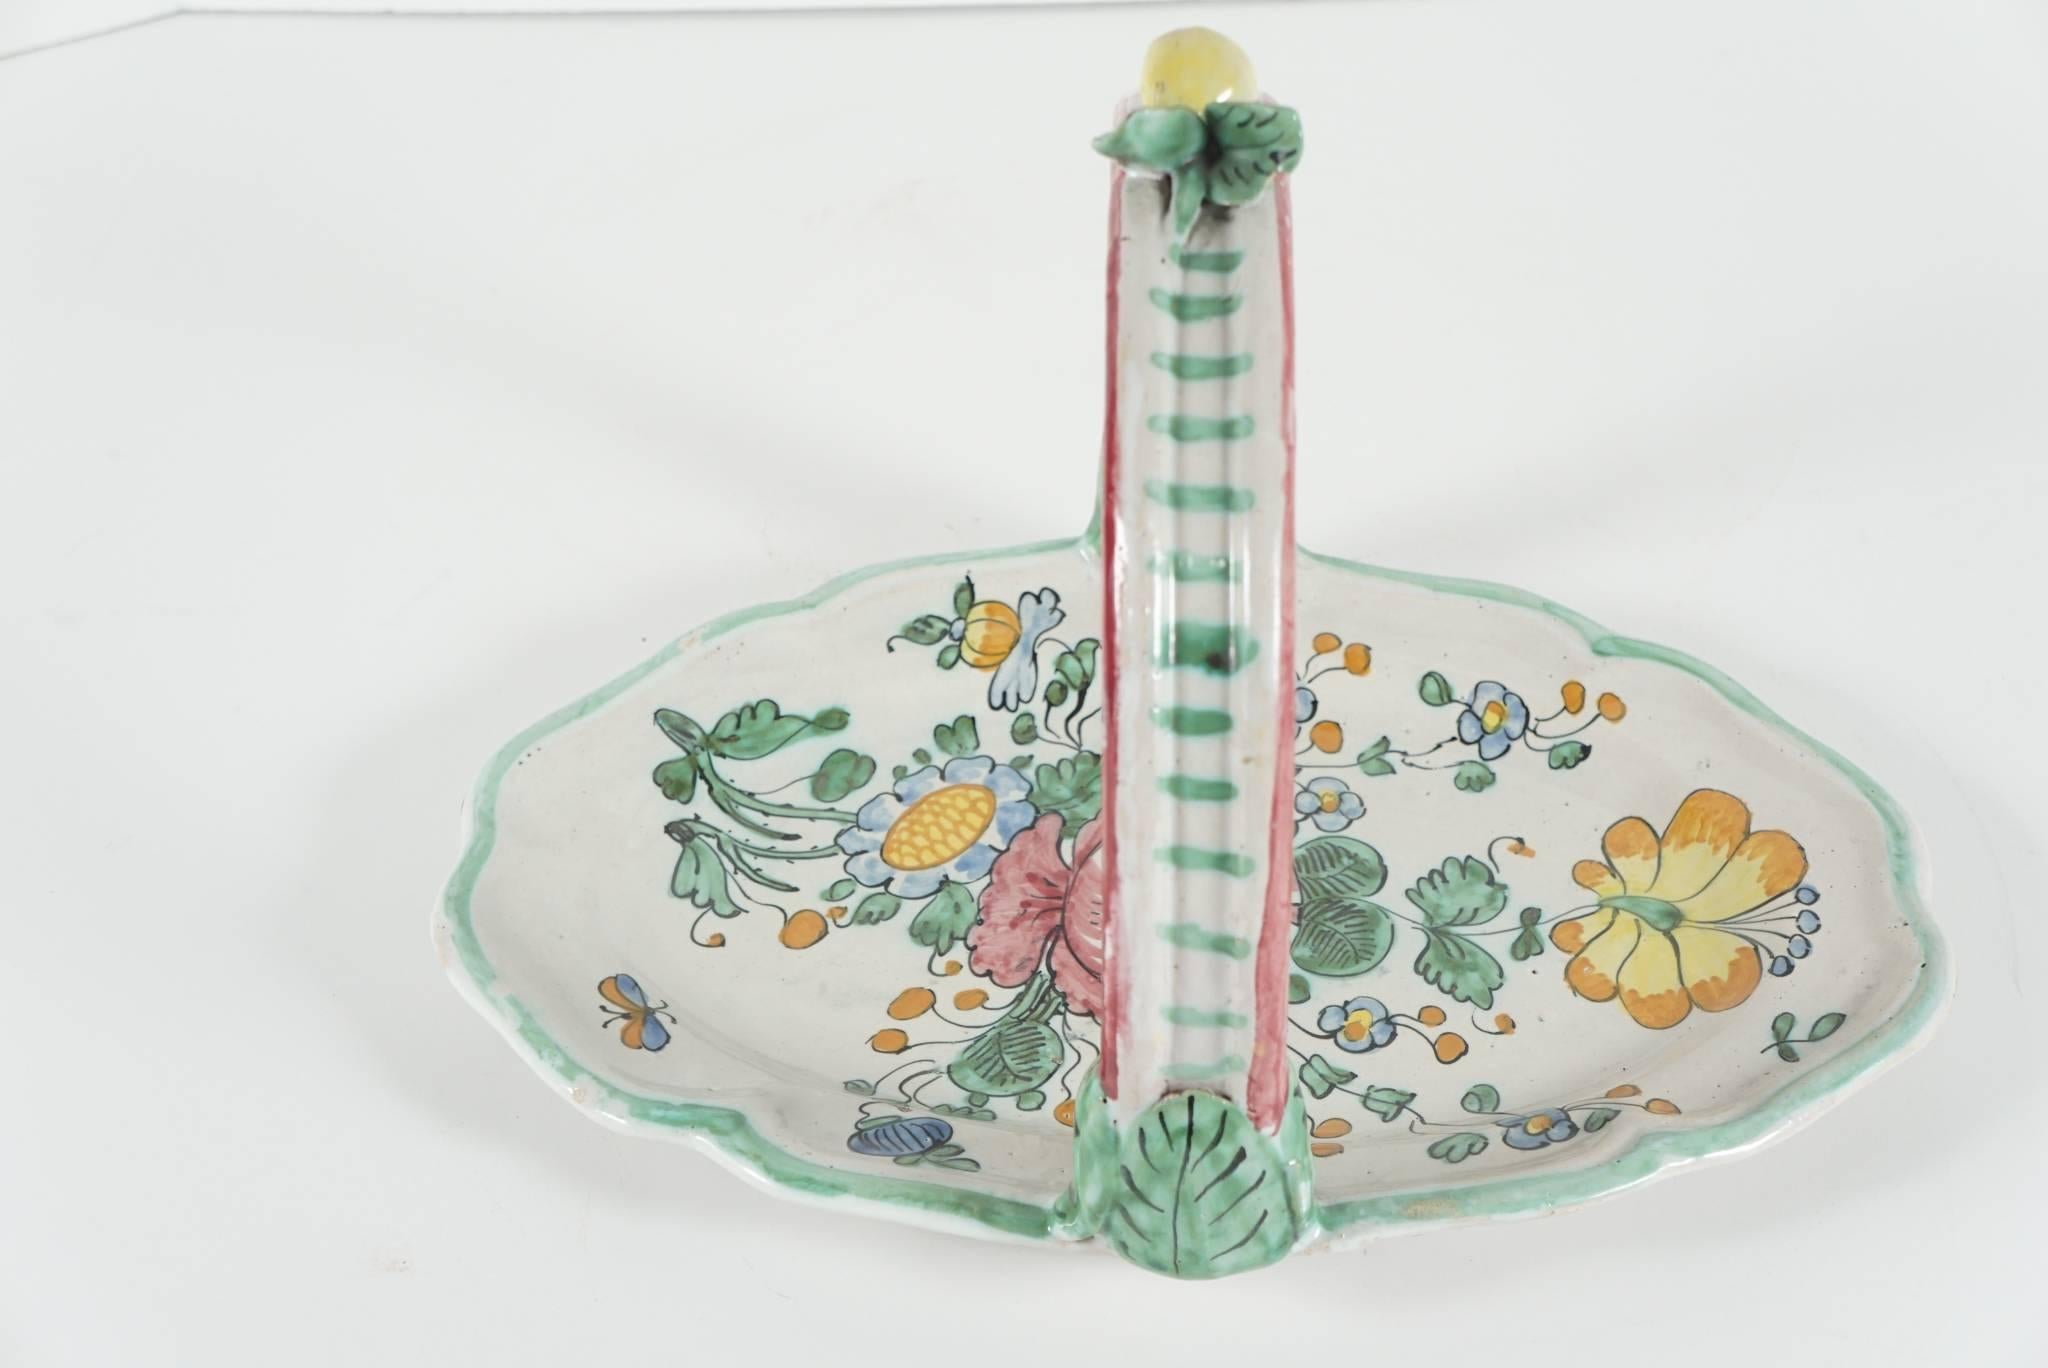 Hand-Painted Italian Pottery Tray with Floral Decoration from the Estate of Bunny Mellon